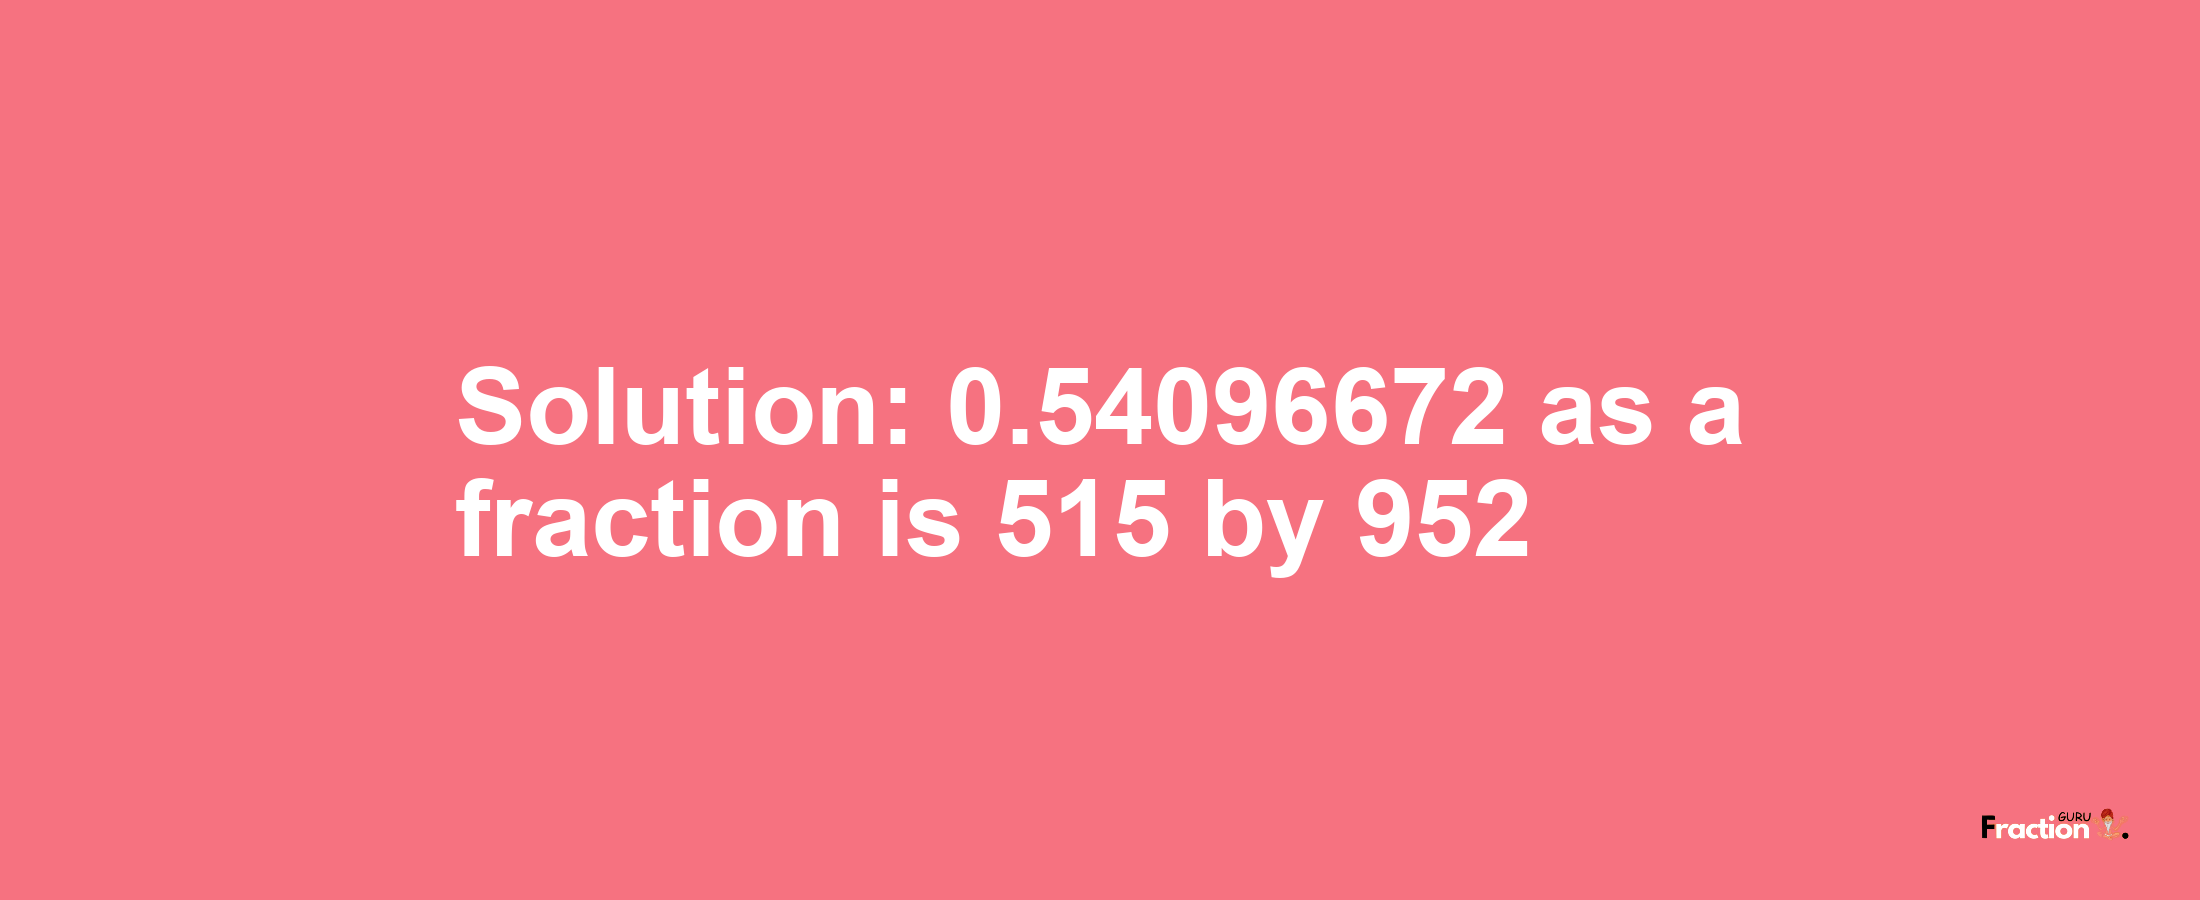 Solution:0.54096672 as a fraction is 515/952